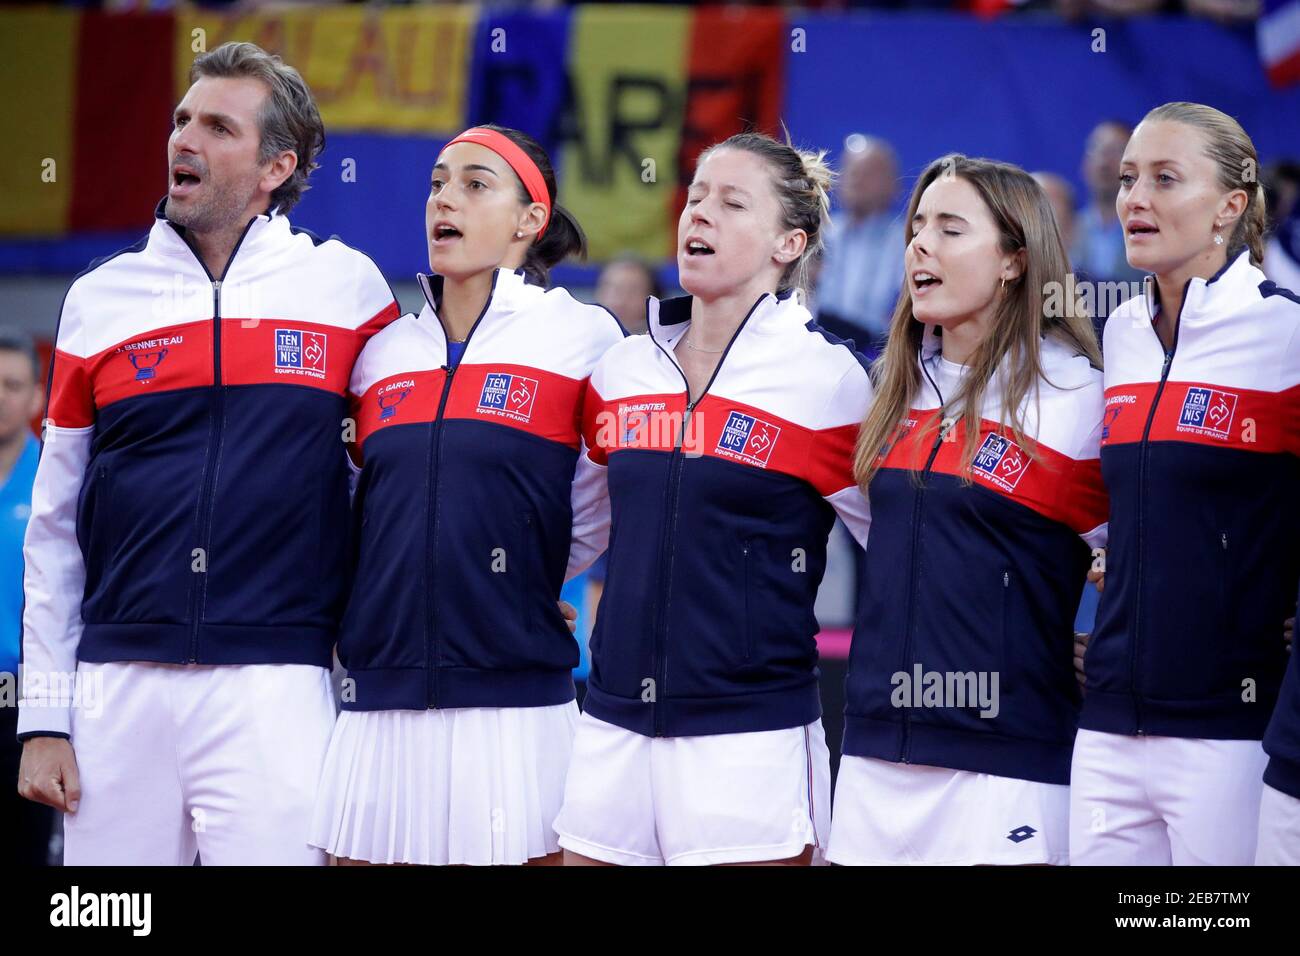 Tennis - Fed Cup - World Group Semi-Final - France v Romania - Kindarena,  Rouen, France - April 21, 2019 France captain Julien Benneteau and team  before their match REUTERS/Charles Platiau Stock Photo - Alamy